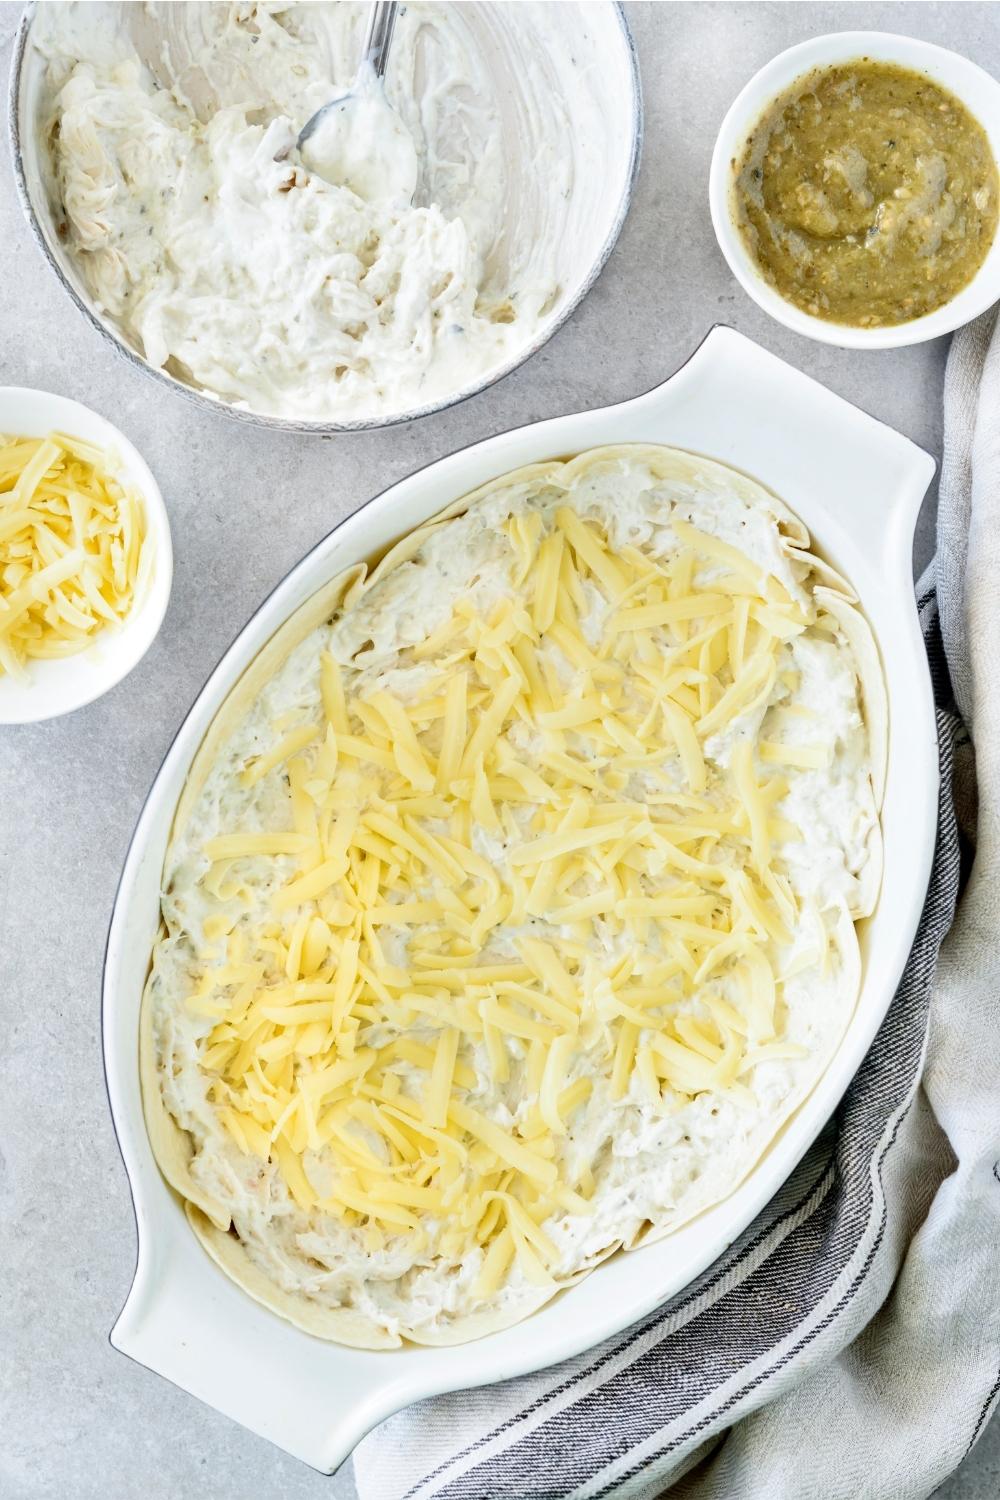 A casserole dish with a layer of flour tortillas and shredded cheese.